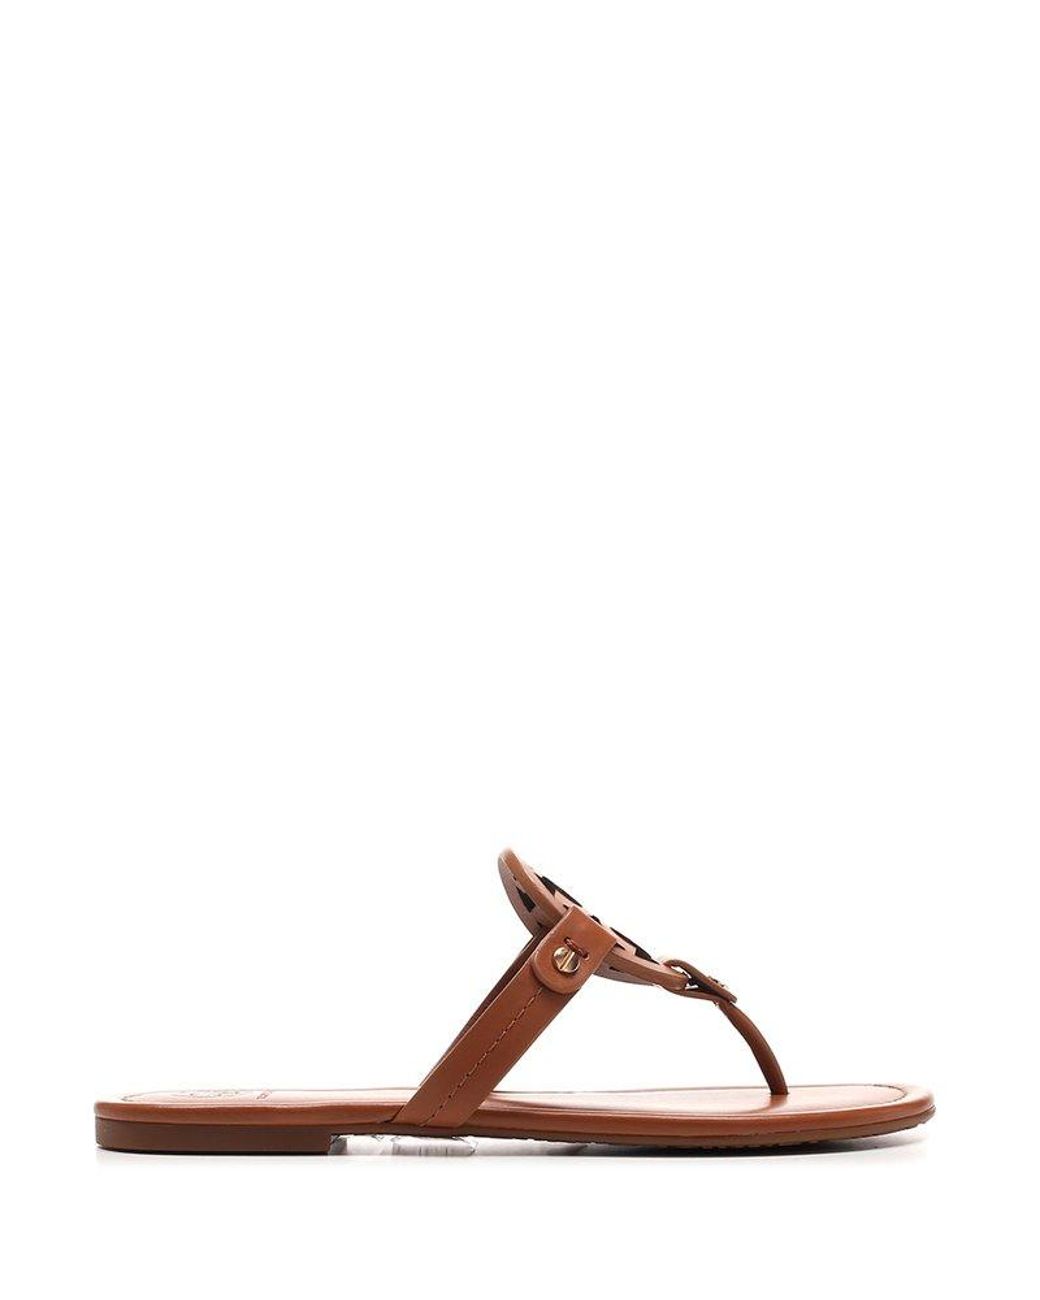 Tory Burch Miller Sandals in Brown | Lyst